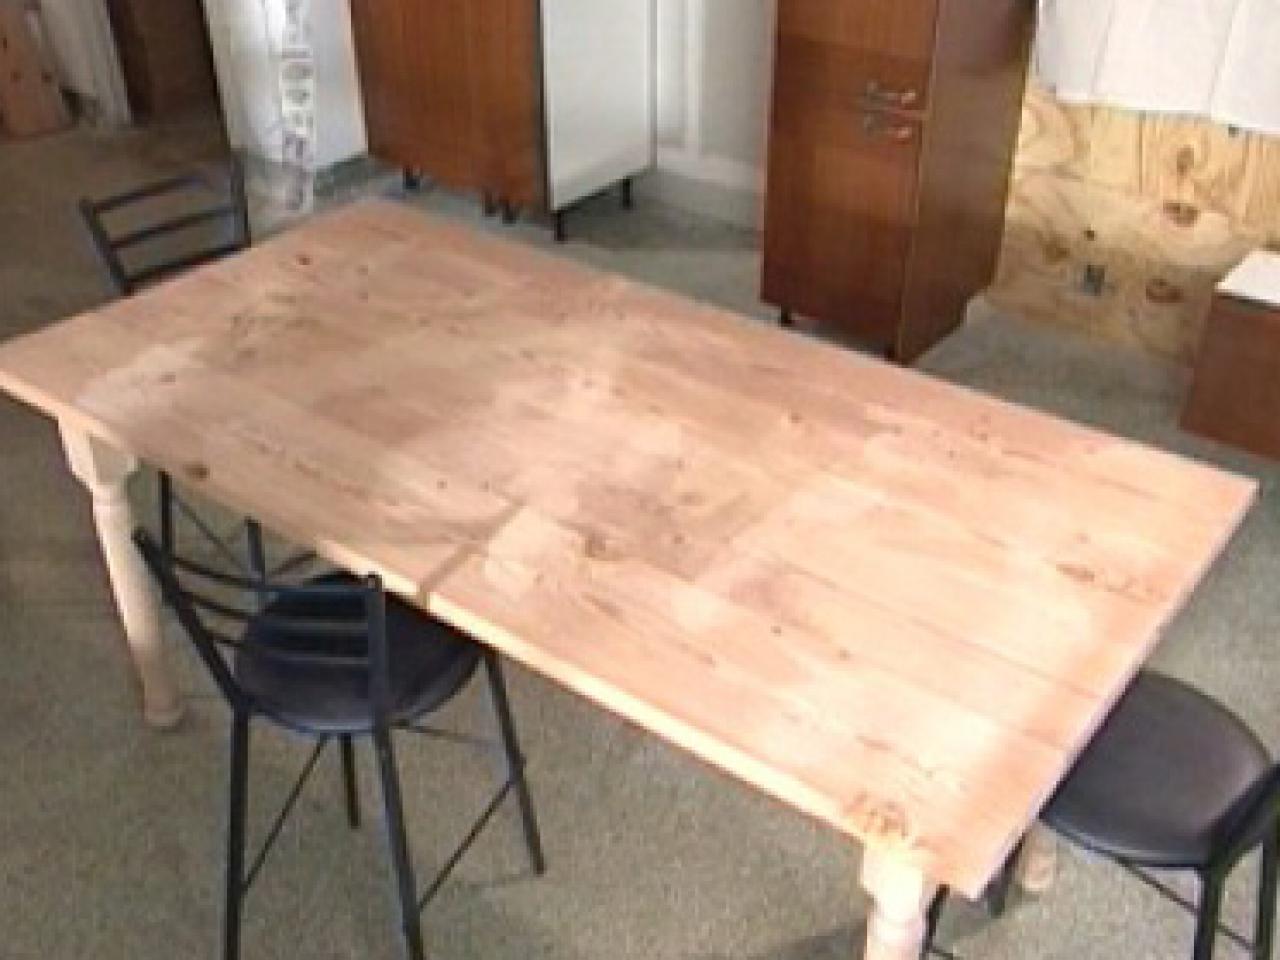 Build A Diy Wood Table How Tos, How To Make Your Own Wooden Table